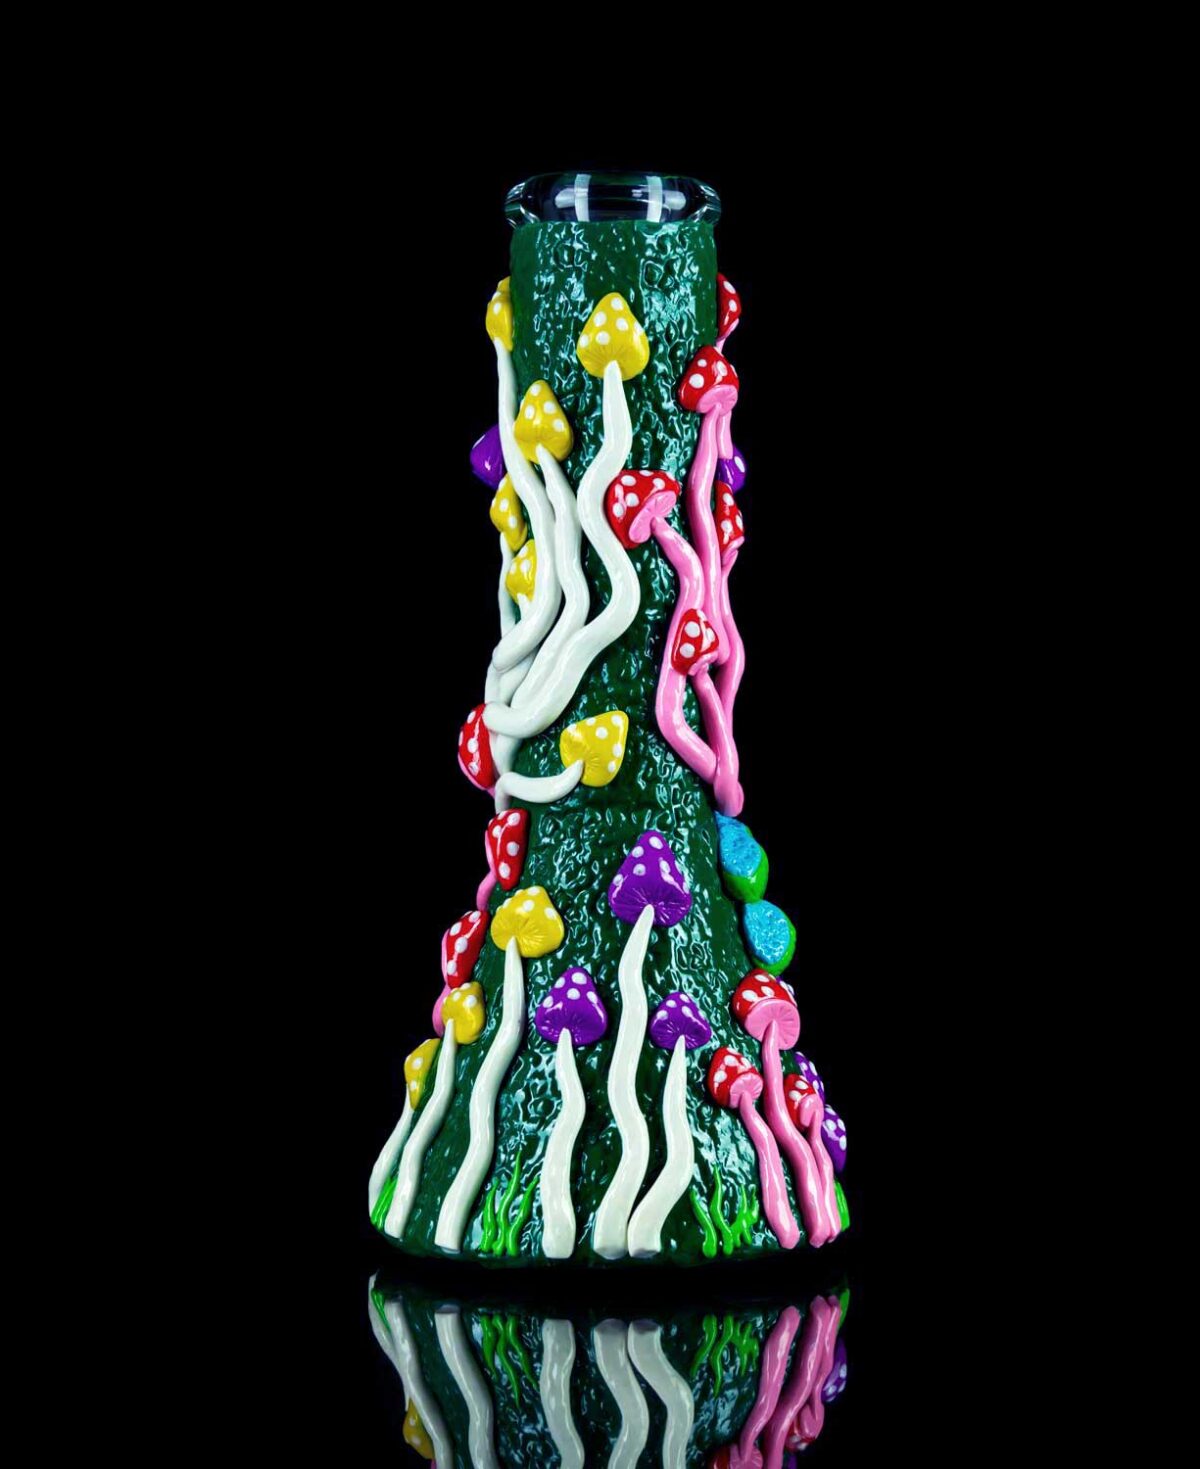 7mm bong with hand painted mushroom details